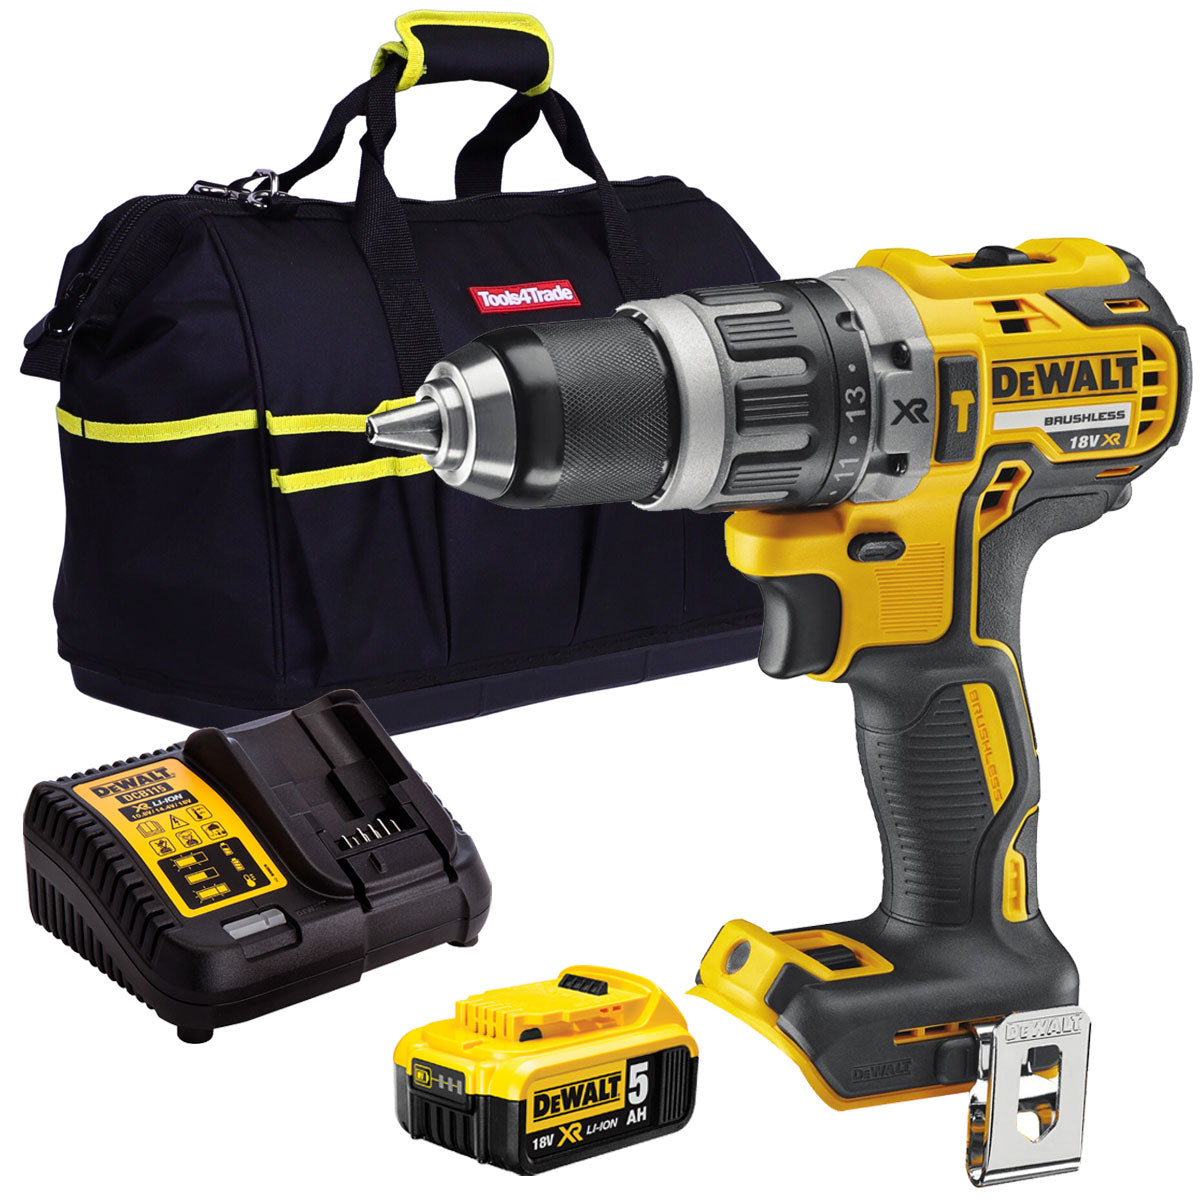 Dewalt DCD796N 18V Brushless Combi Drill with 1 x 5.0Ah Battery Charger & 18